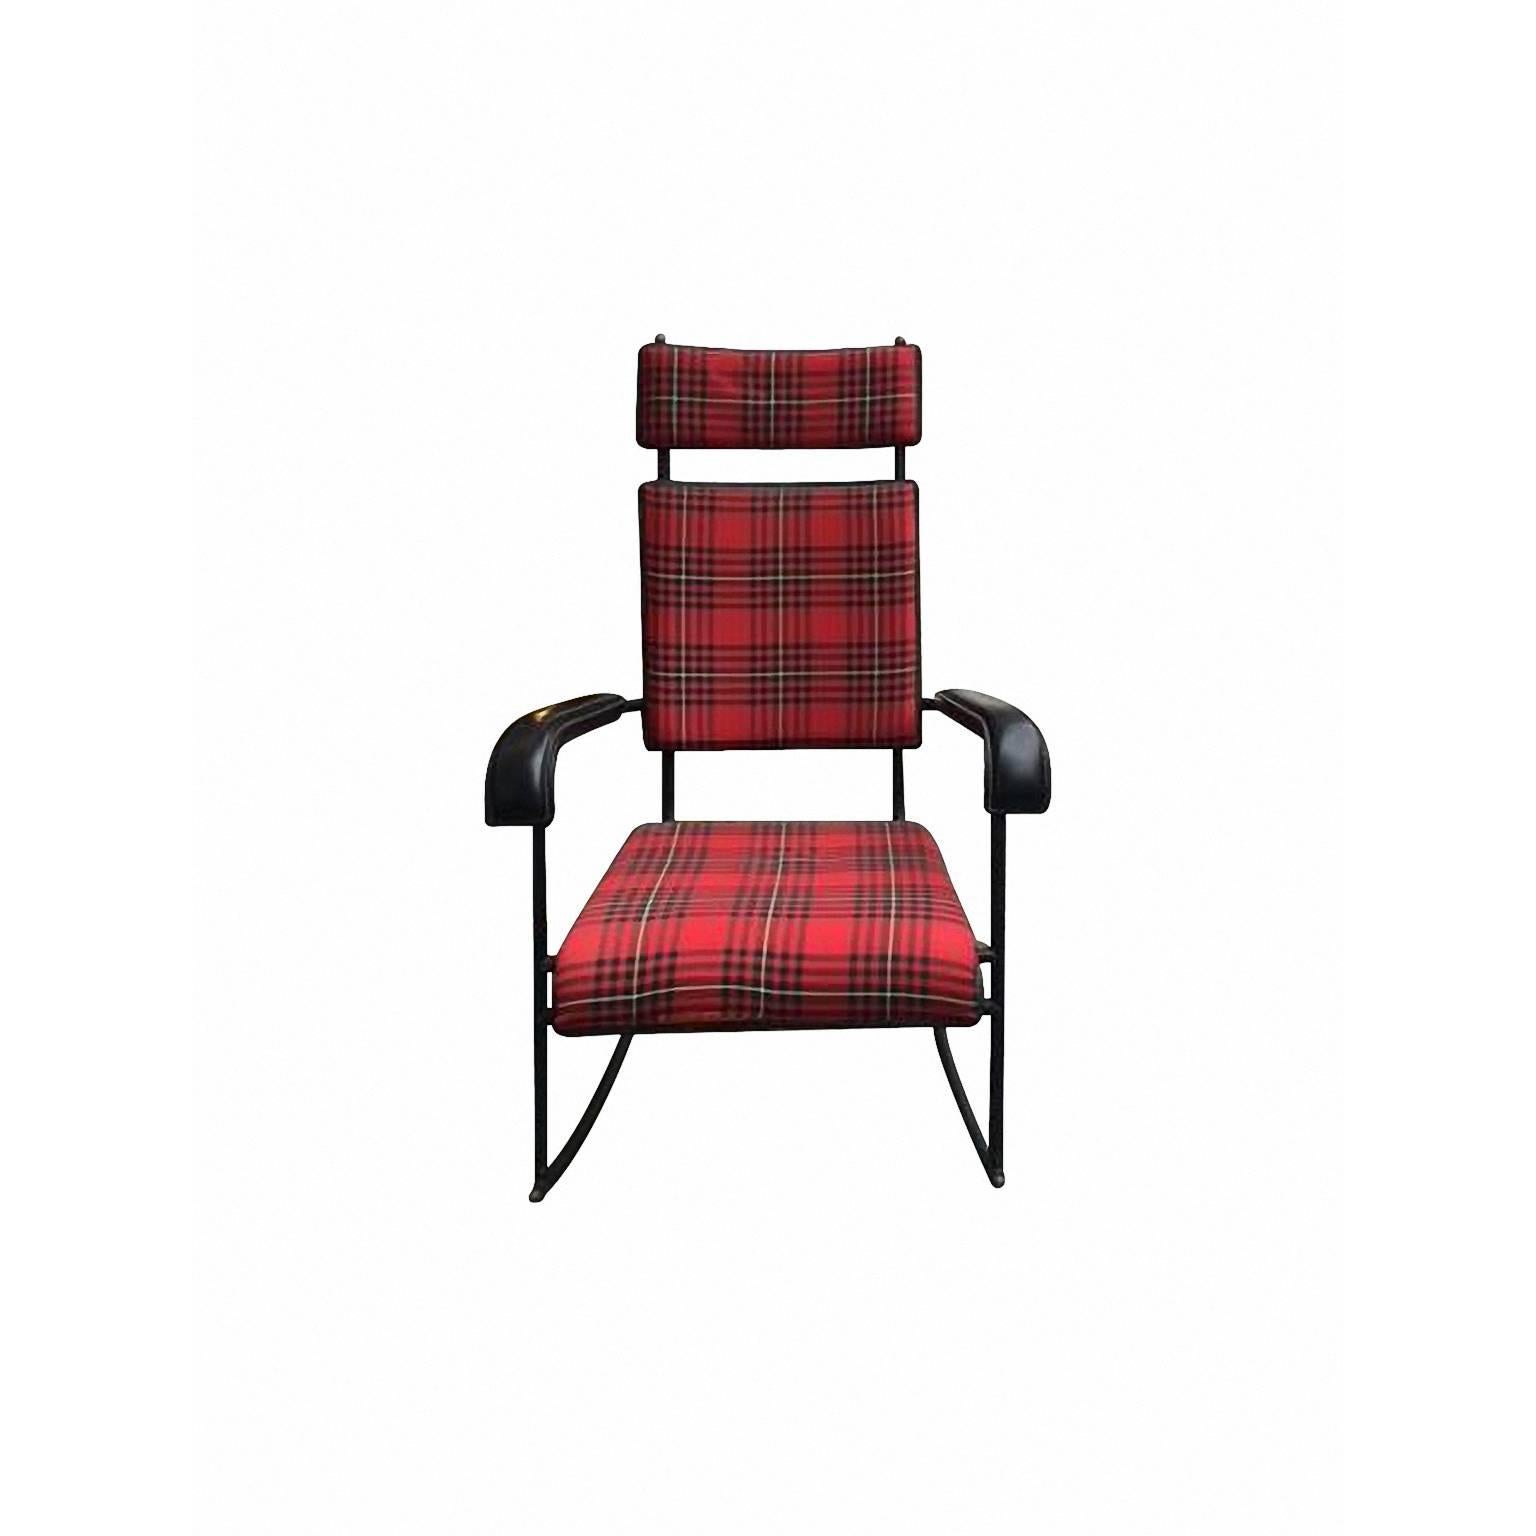 Metal Jacques Adnet 1950s Rare Tartan Rocking Chair For Sale